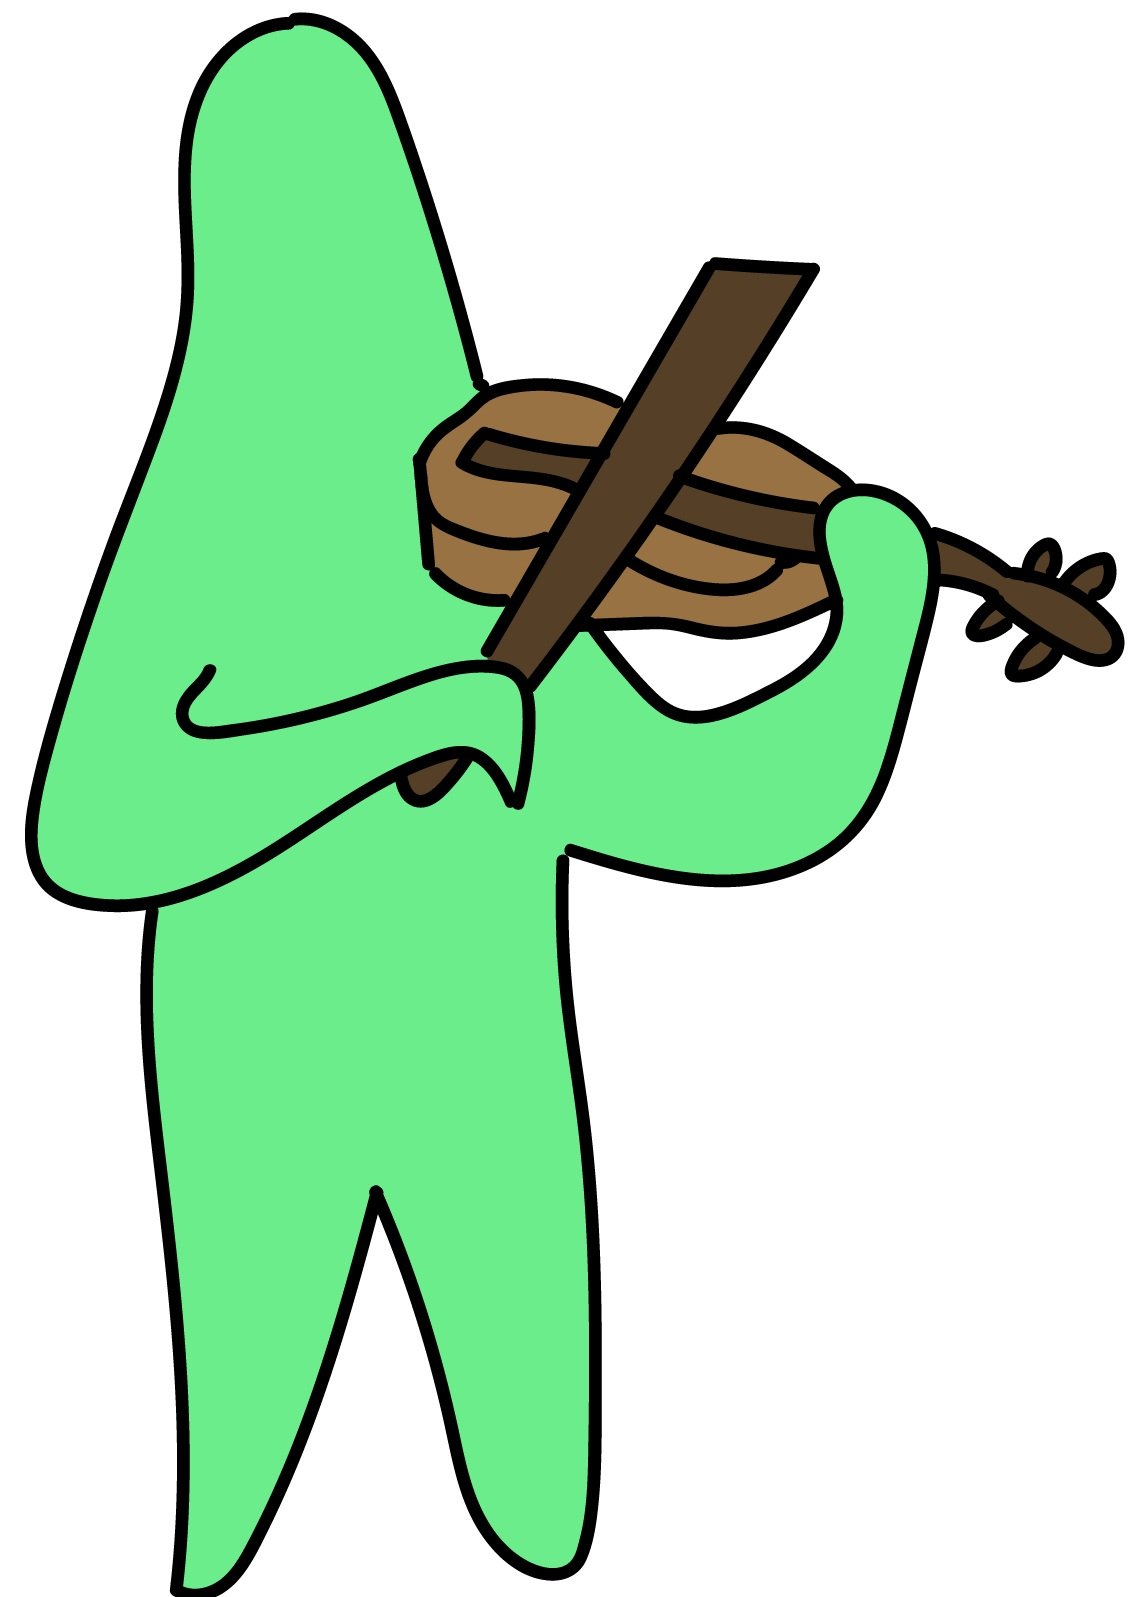 Green Star Fiddle Lessons